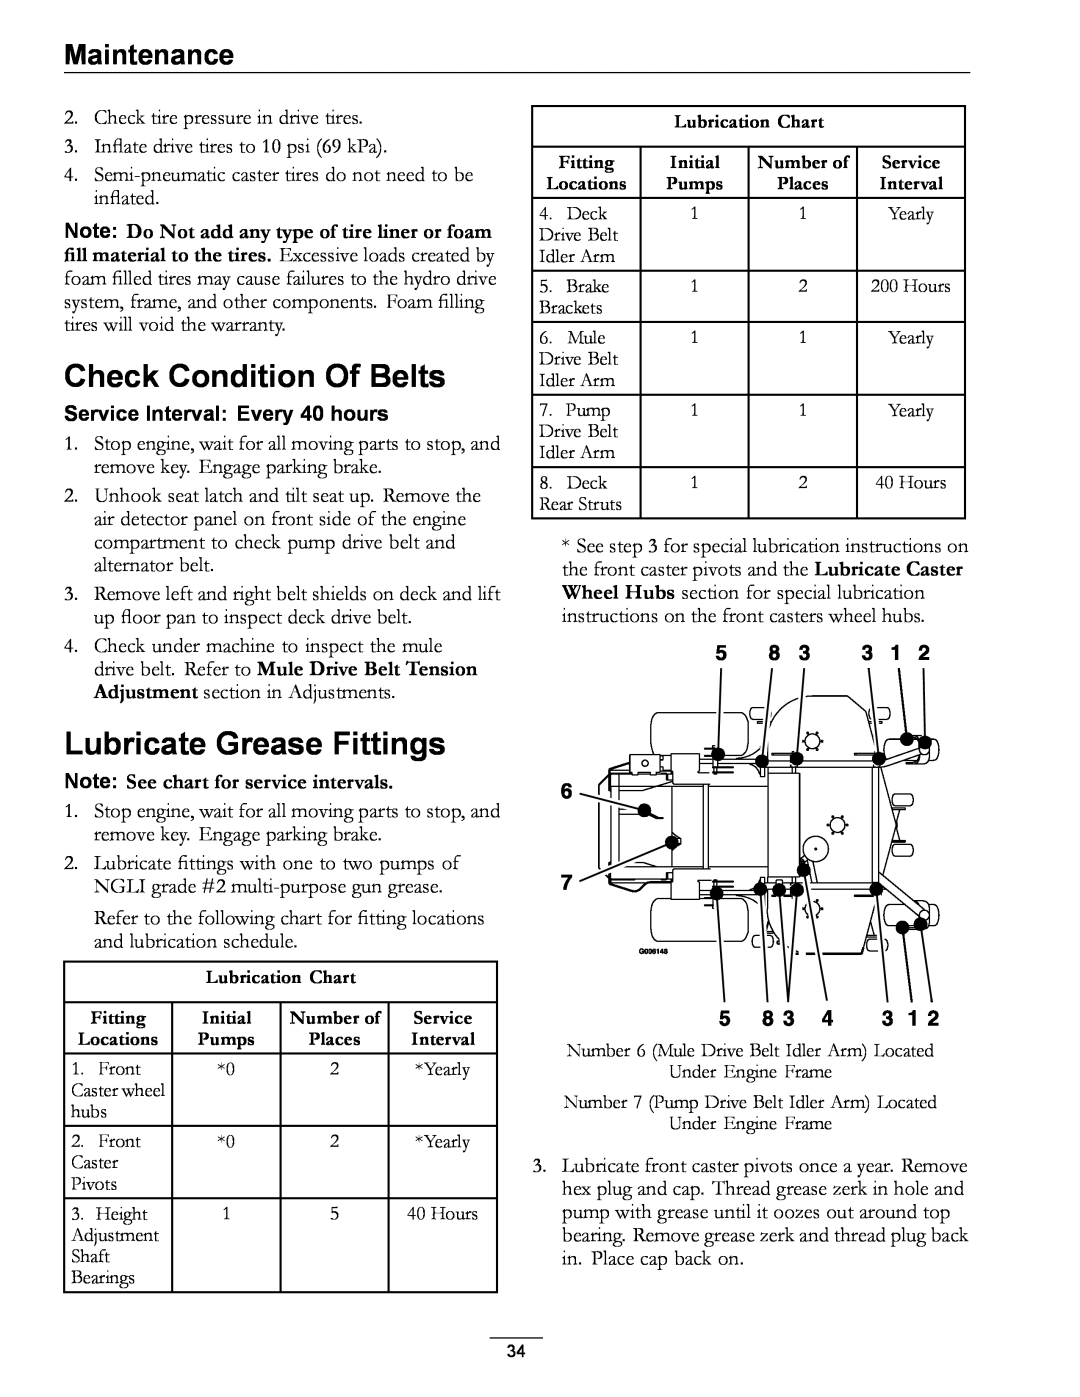 Exmark 920 manual Check Condition Of Belts, Lubricate Grease Fittings, Note See chart for service intervals, Maintenance 